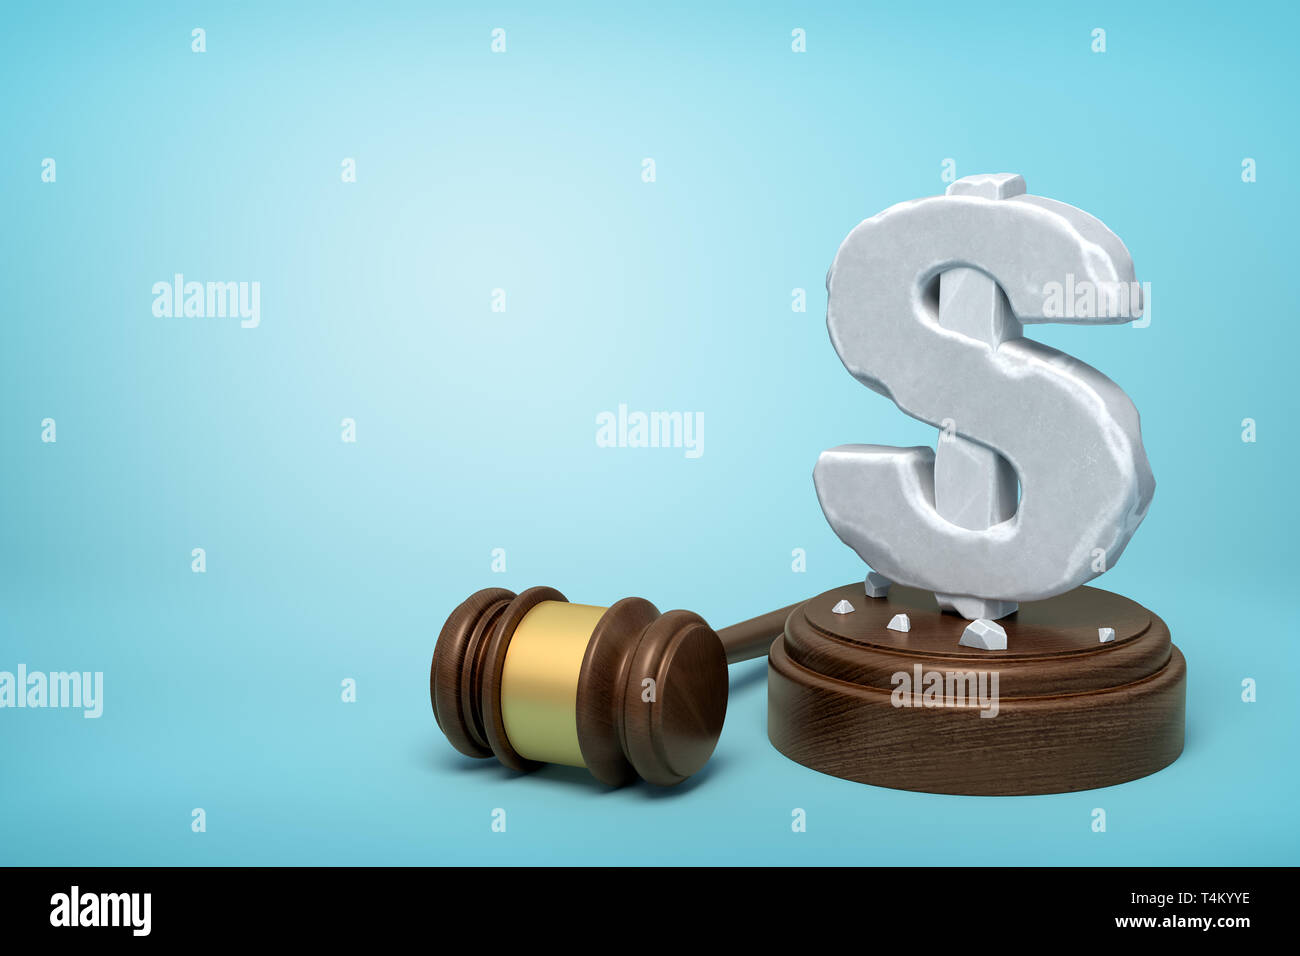 3d rendering of hefty stone dollar symbol standing on wooden sounding block with gavel beside on light-blue background with copy space. Stock Photo